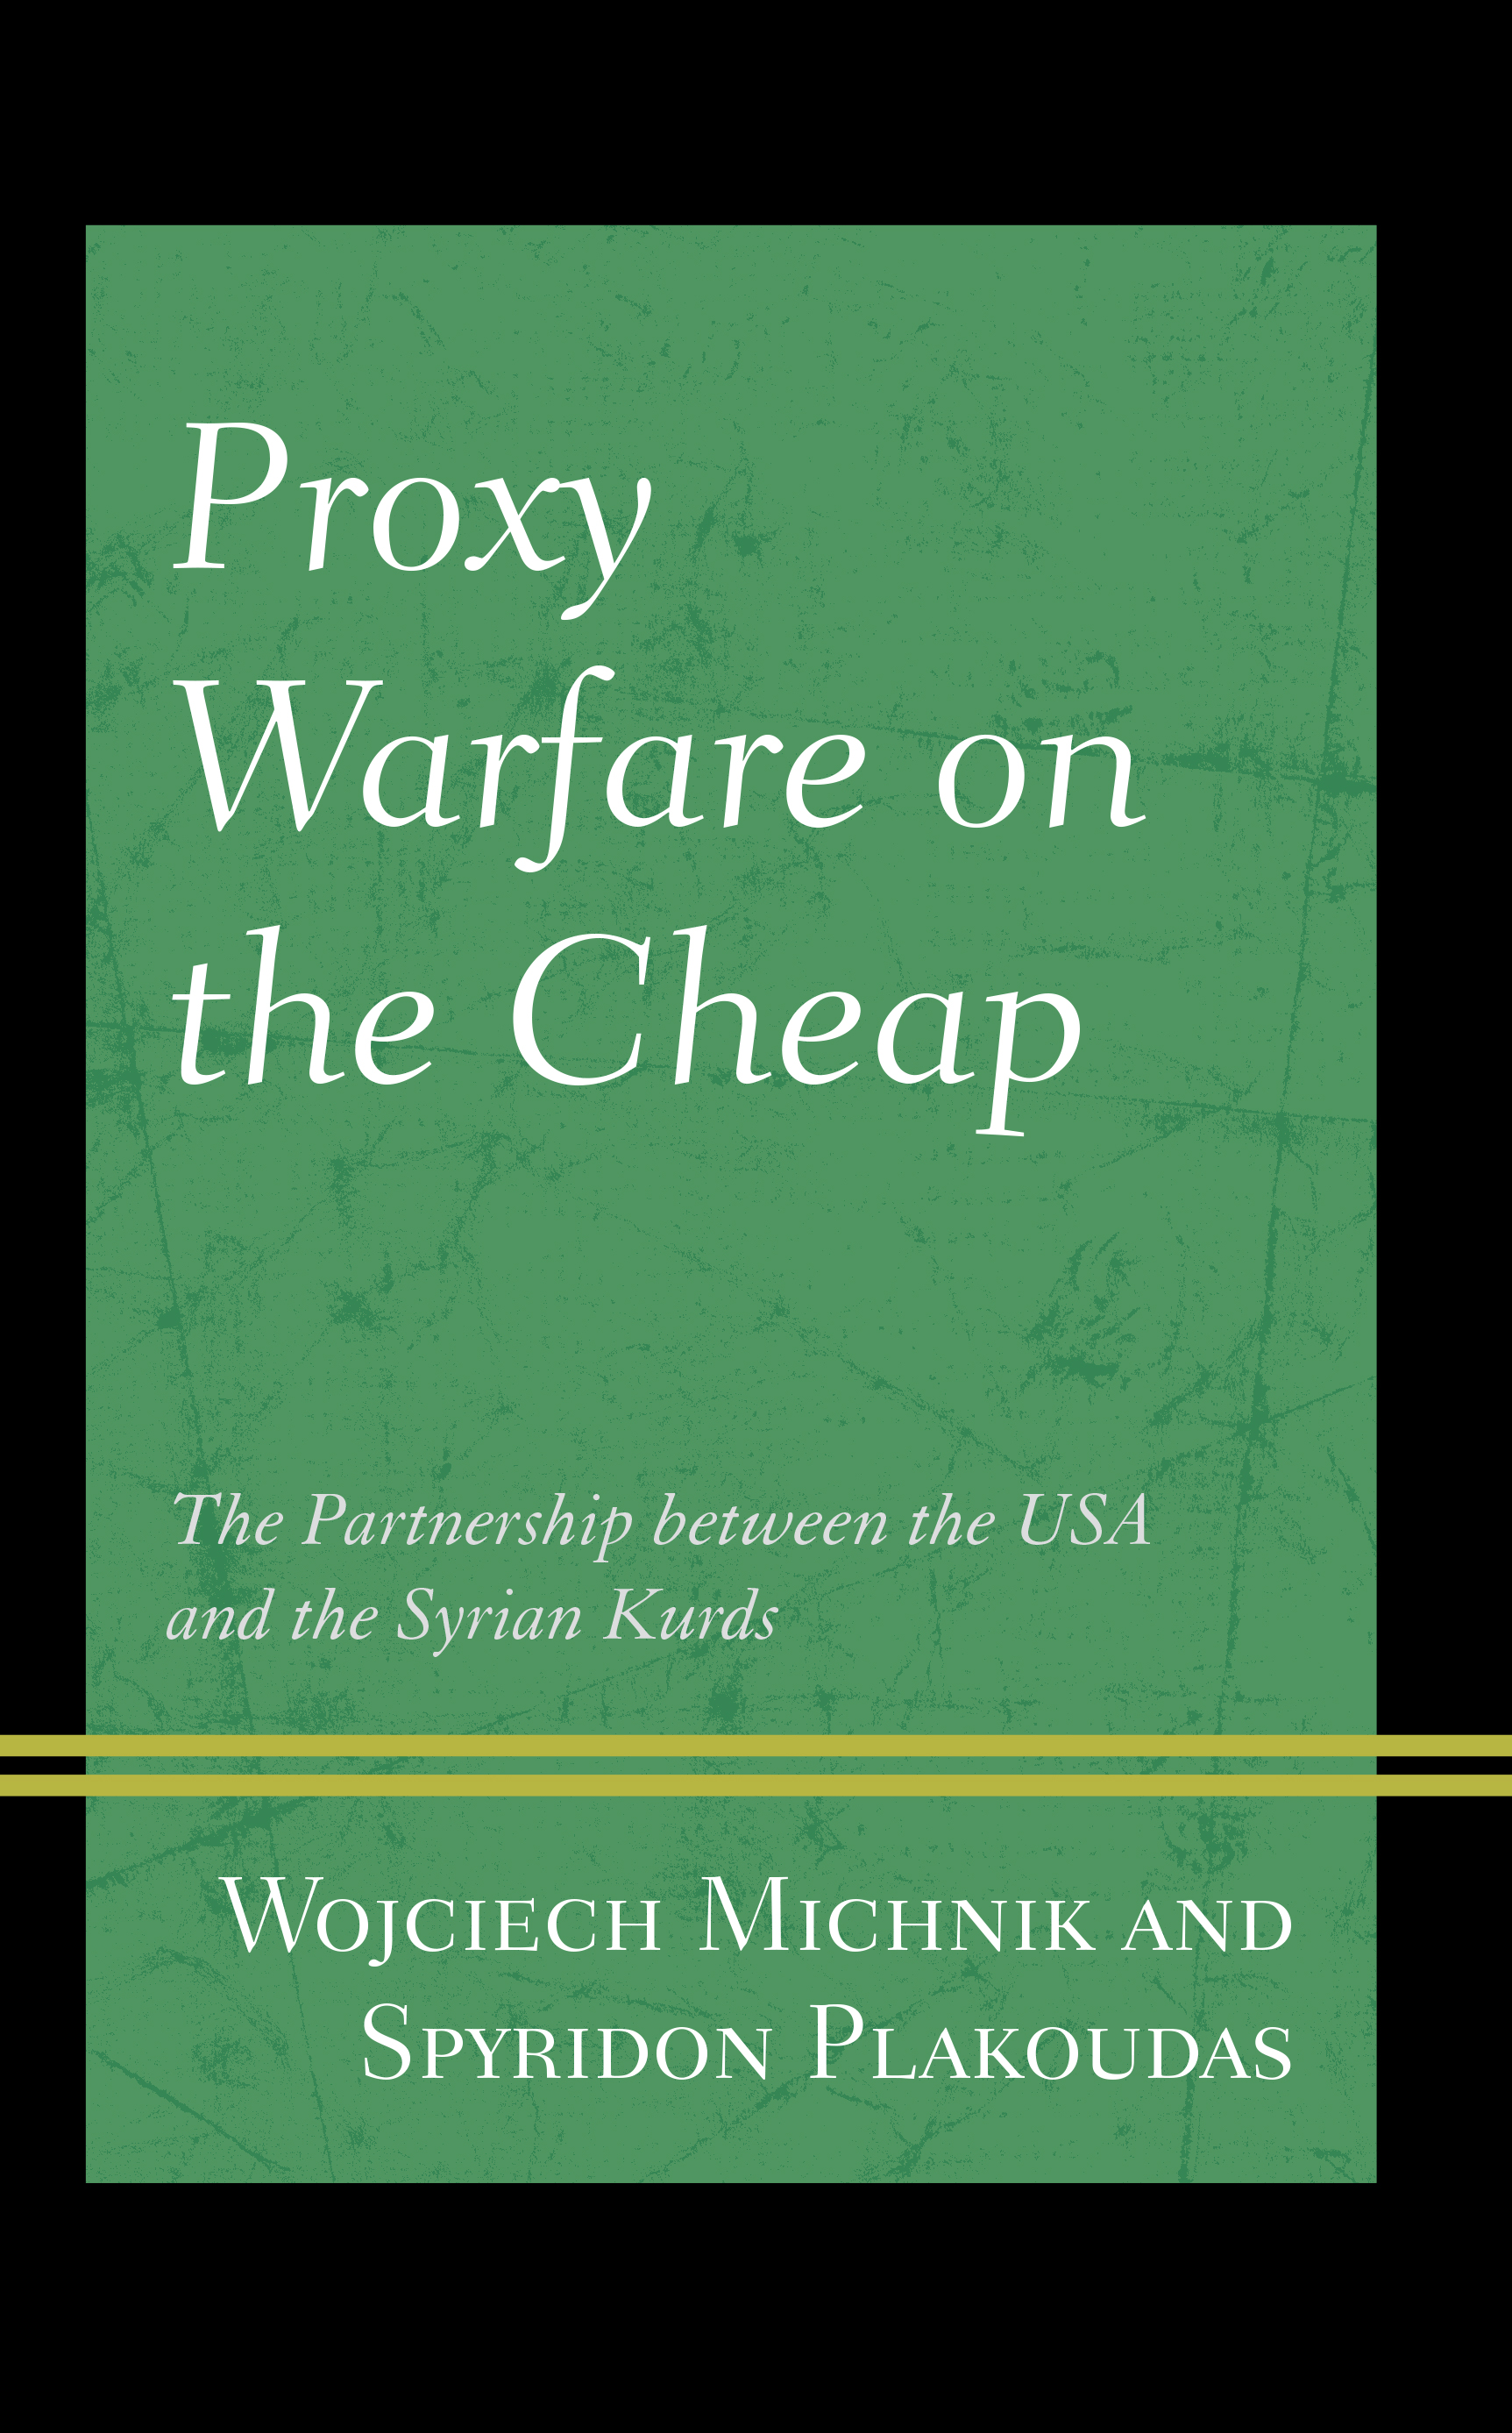 Proxy Warfare on the Cheap: The Partnership between the USA and the Syrian Kurds